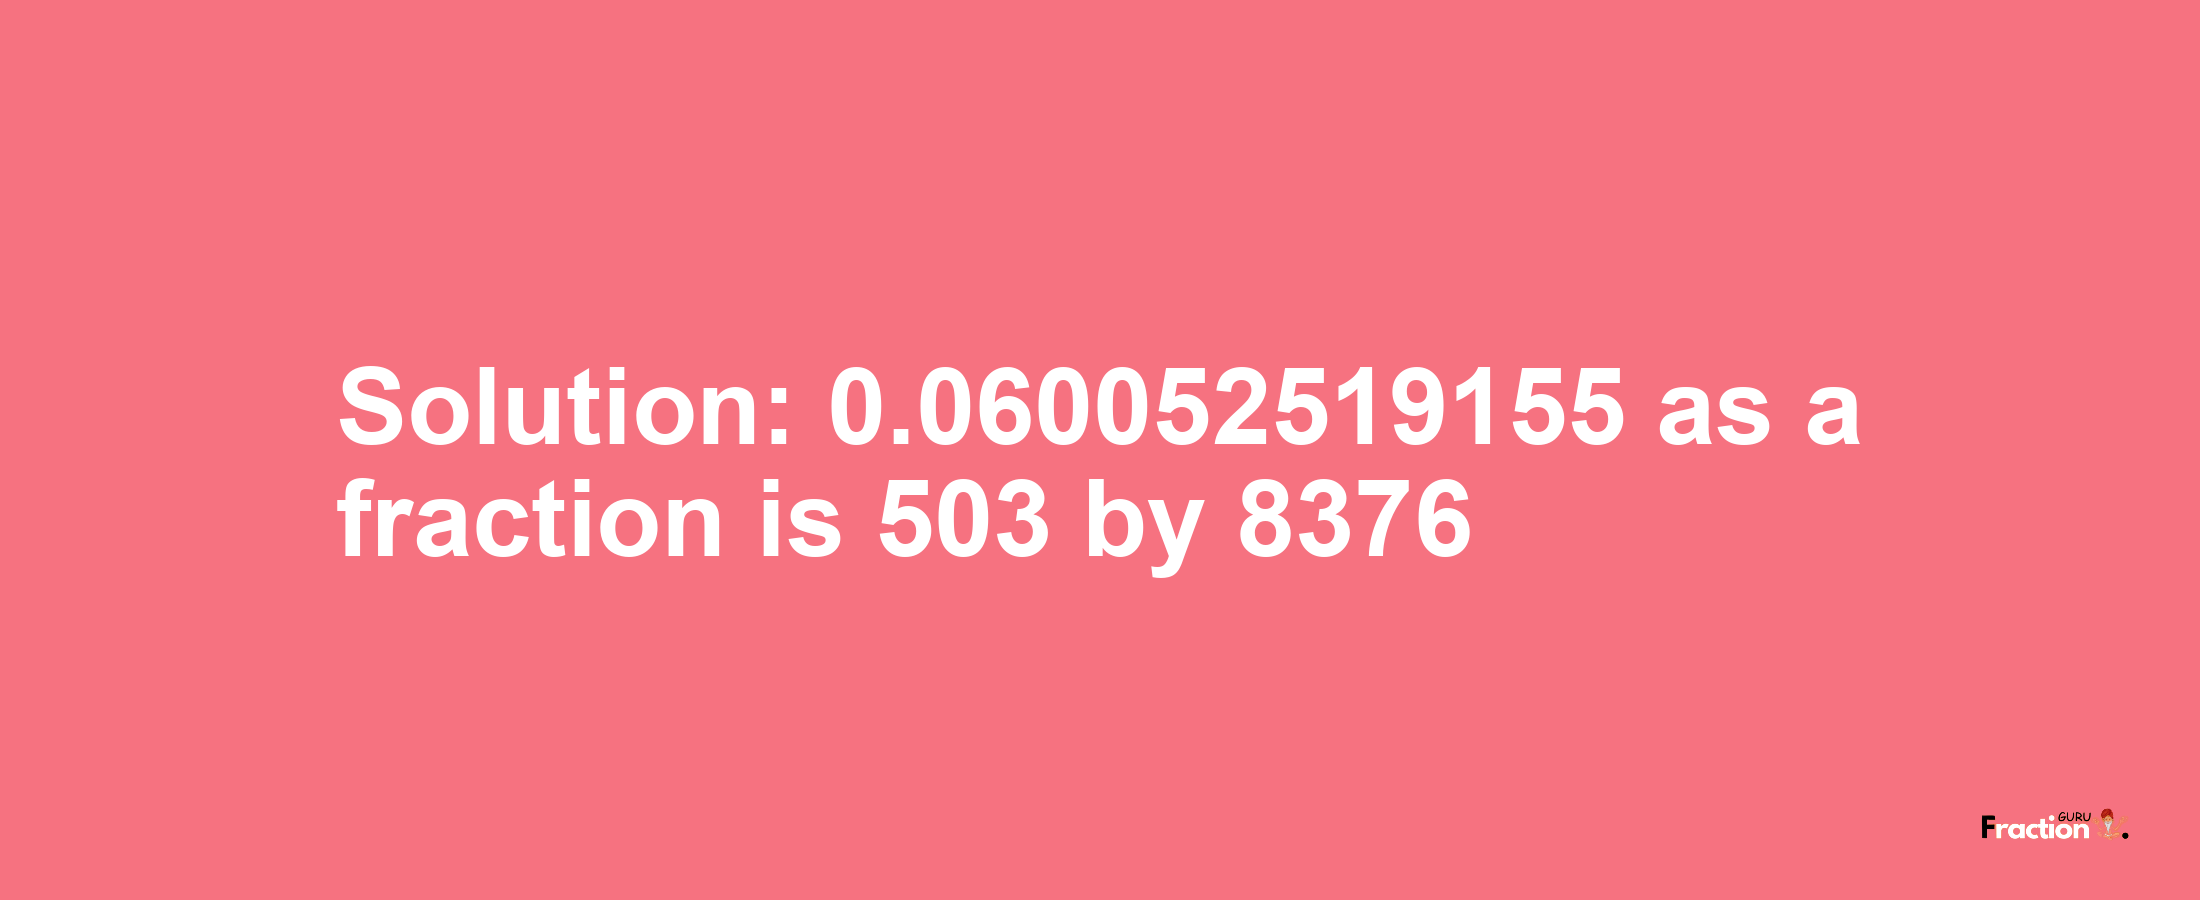 Solution:0.060052519155 as a fraction is 503/8376